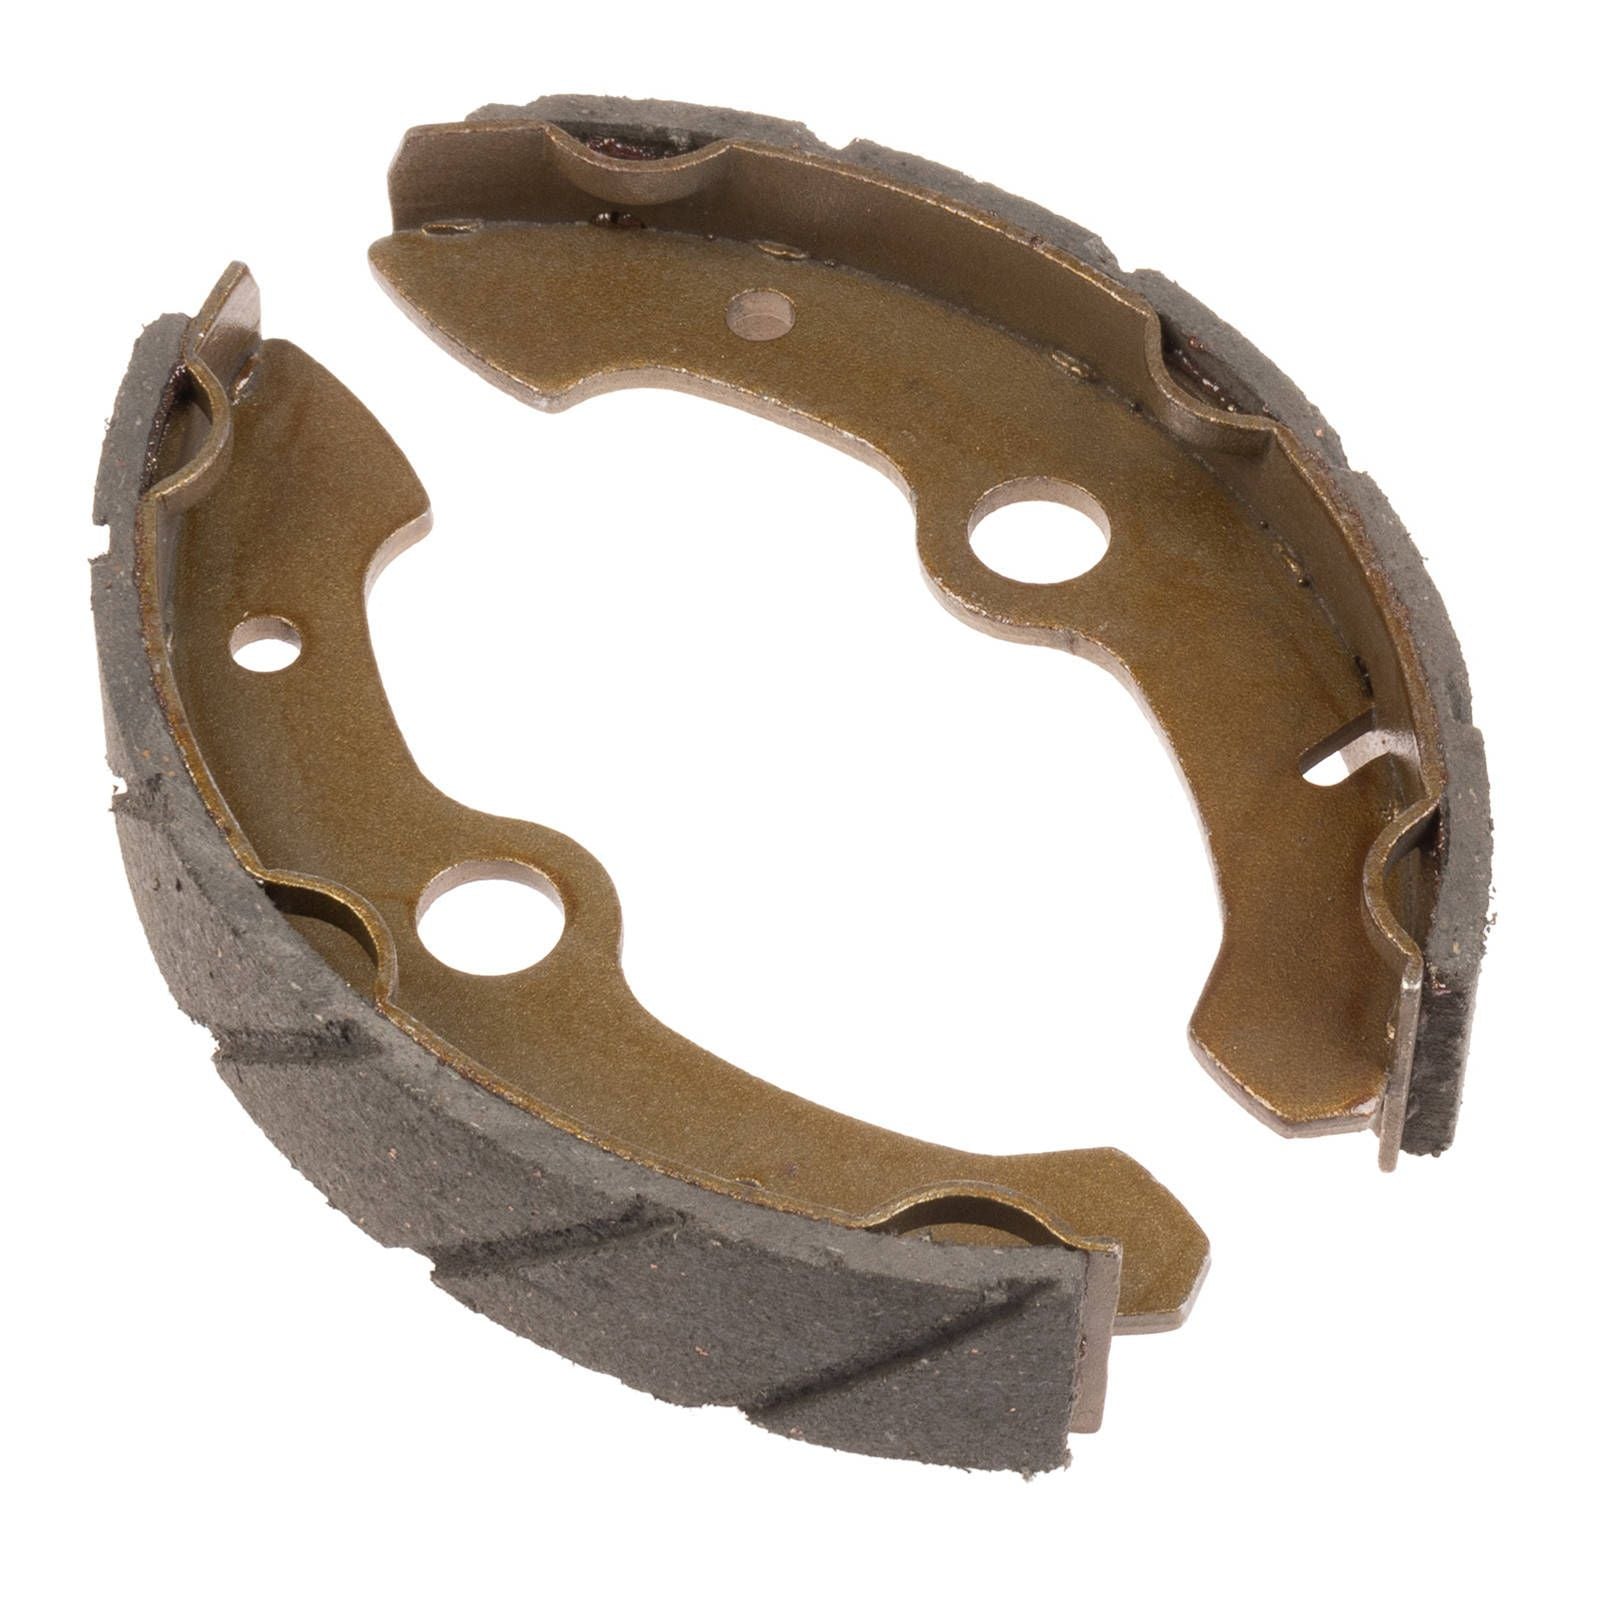 New WHITES Motorcycle Brake Shoes - Water Groove #WPBS27270